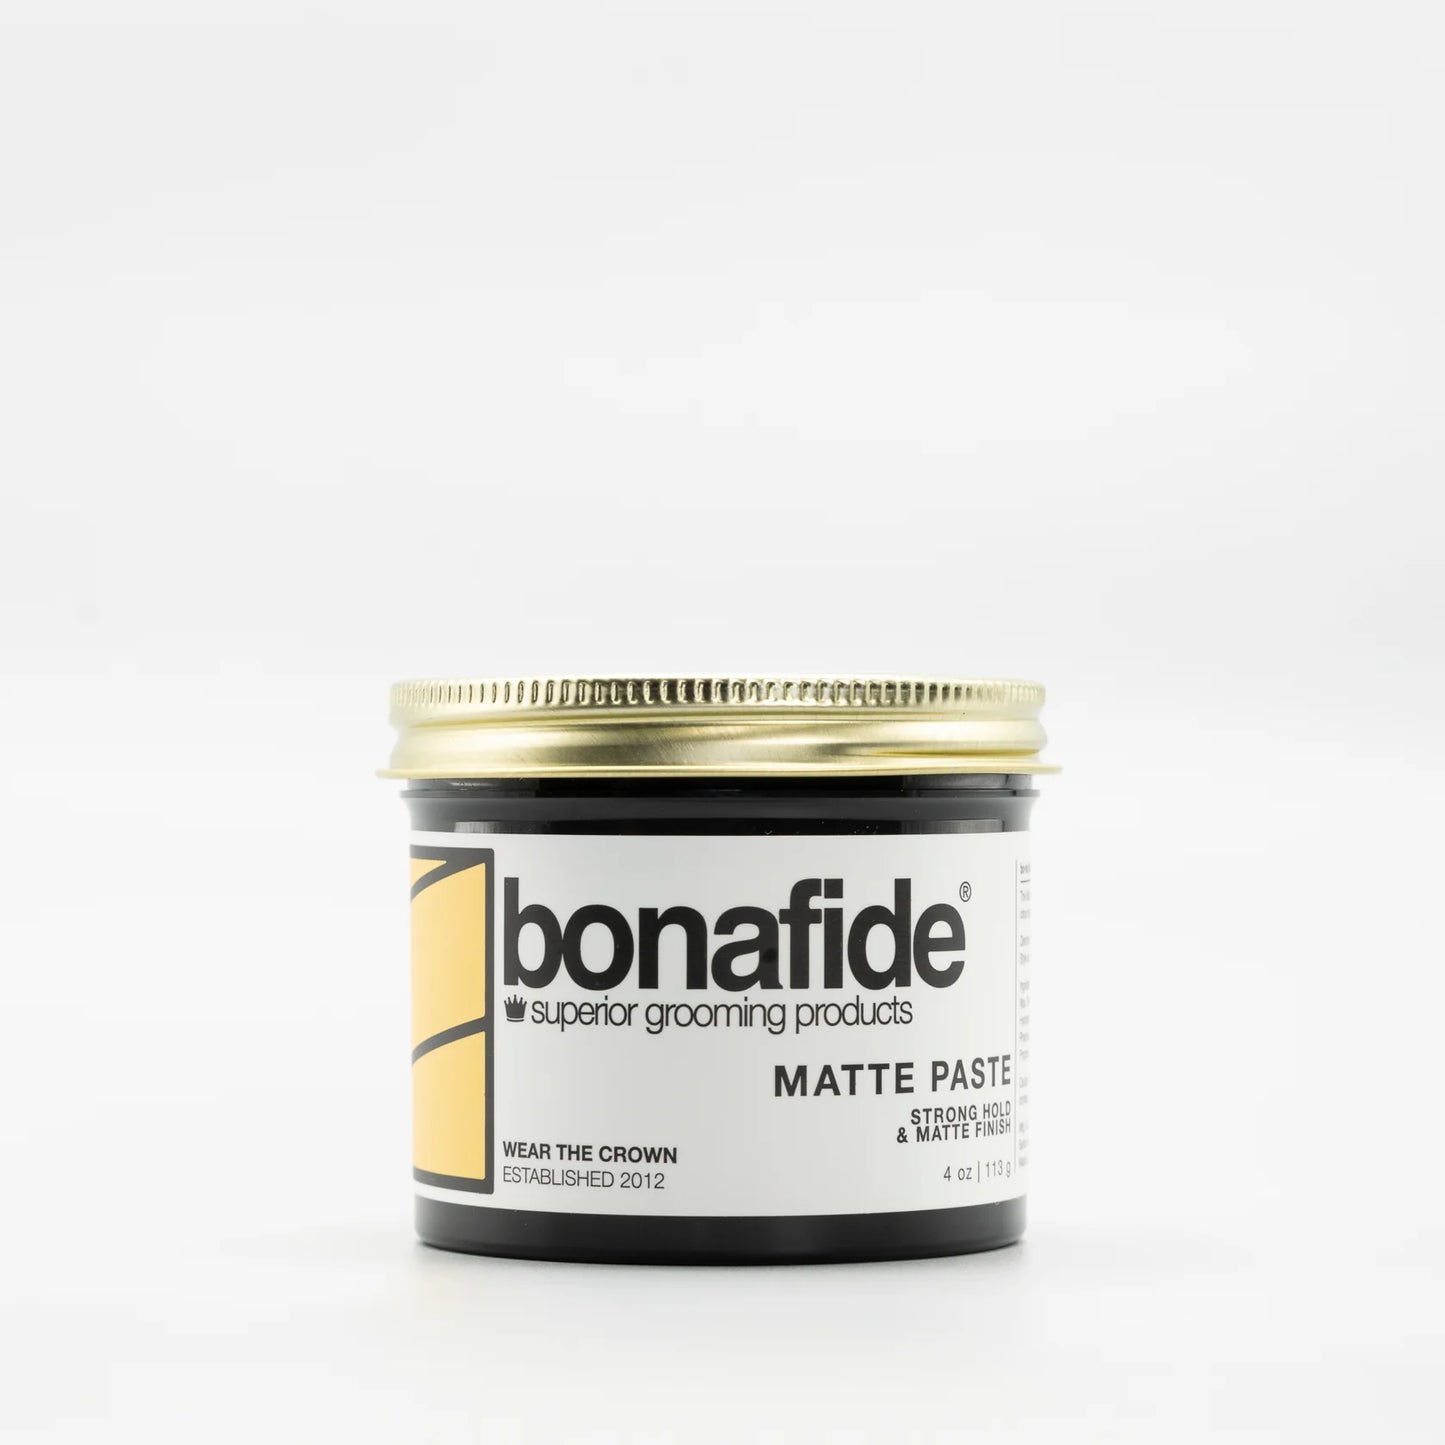 Bona Fide Matte Paste Pomade is a water-based paste with a strong hold, matte finish, and citrus scent. For all hair styles.